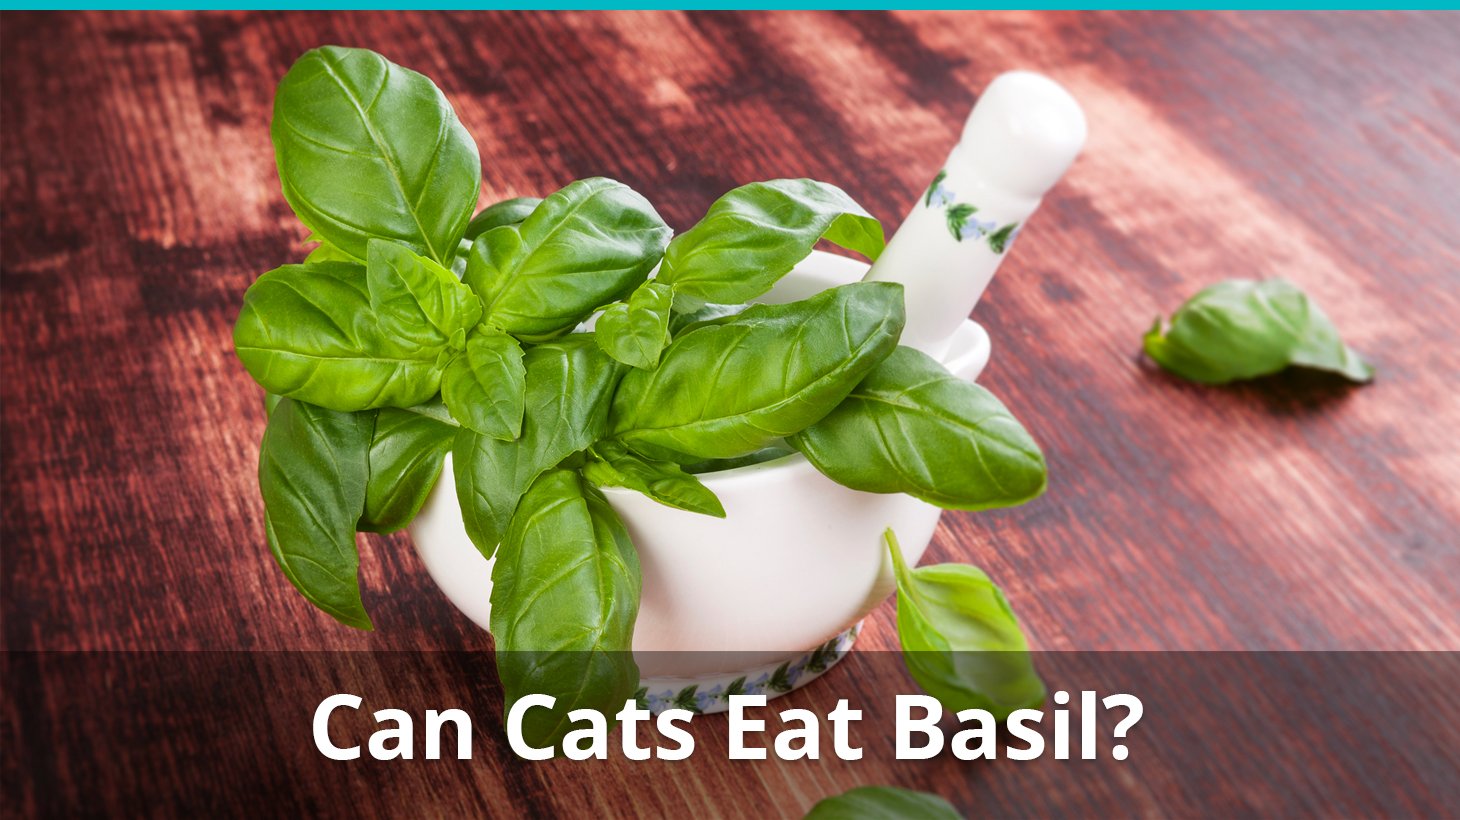 Can Cats Eat Basil? Is It Safe And Good, Or Toxic And Bad For Them?